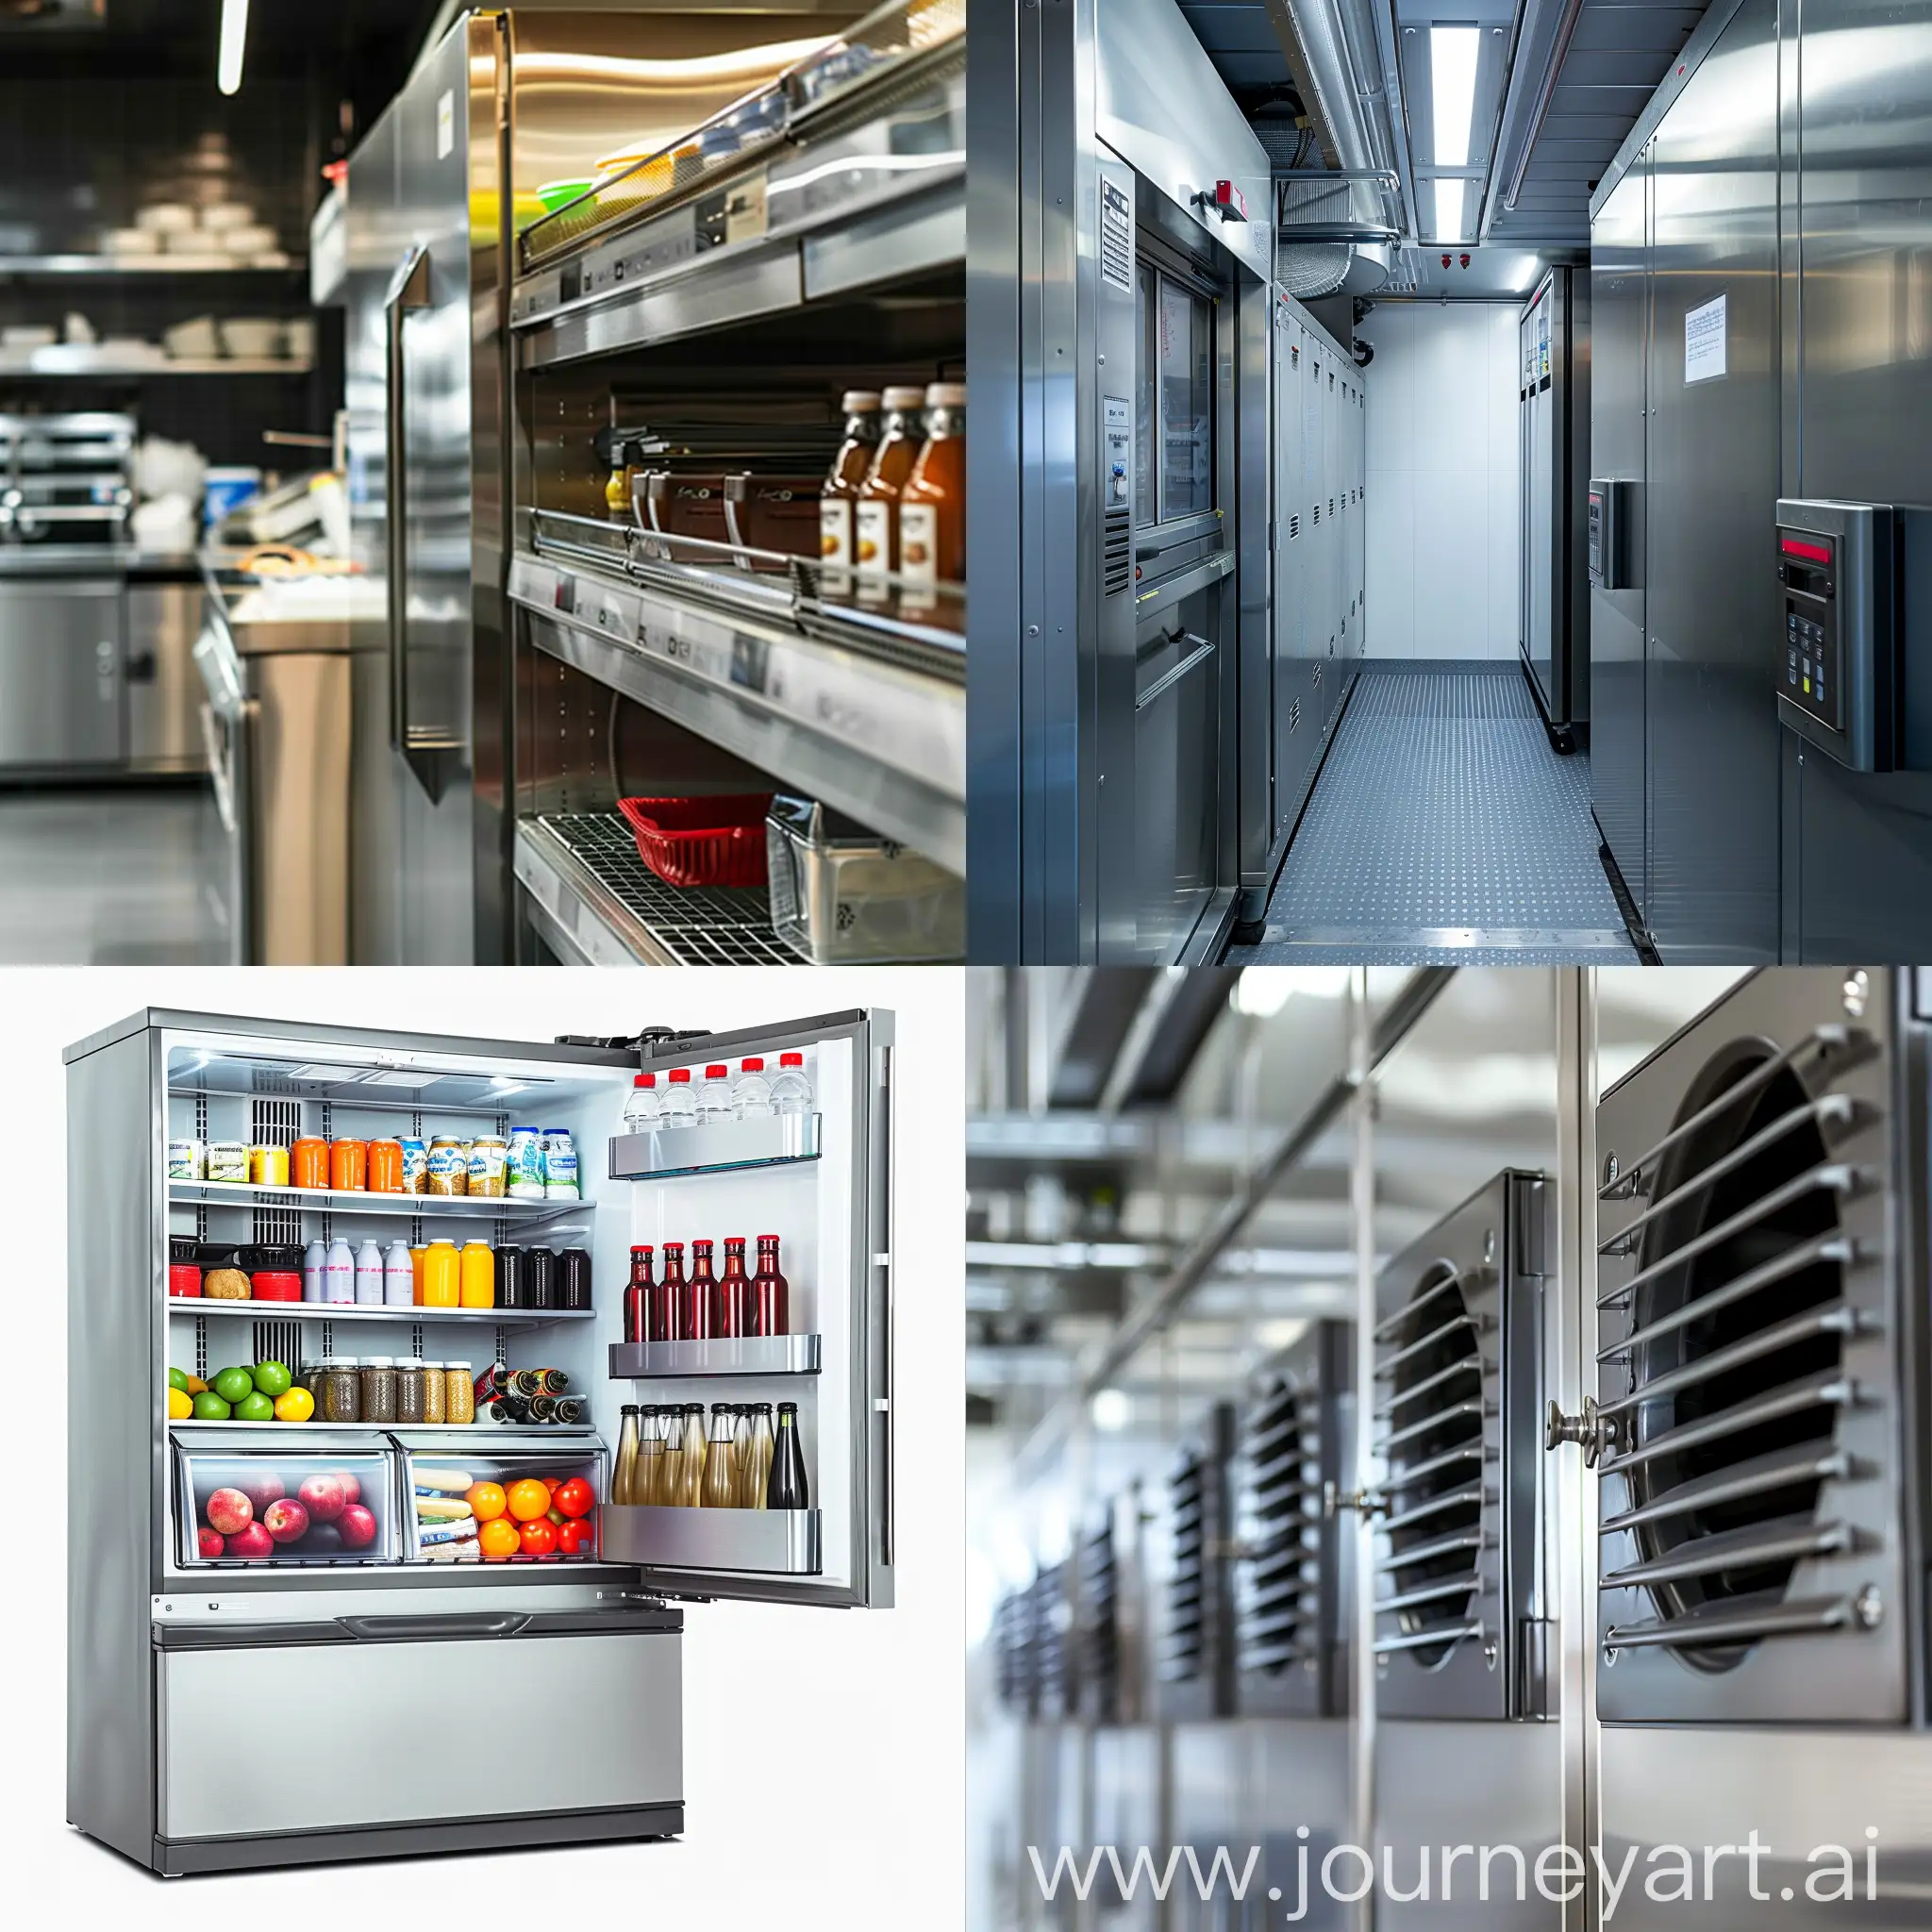 Comprehensive-Refrigeration-Masterclass-Guide-Techniques-Tips-and-Equipment-Essentials